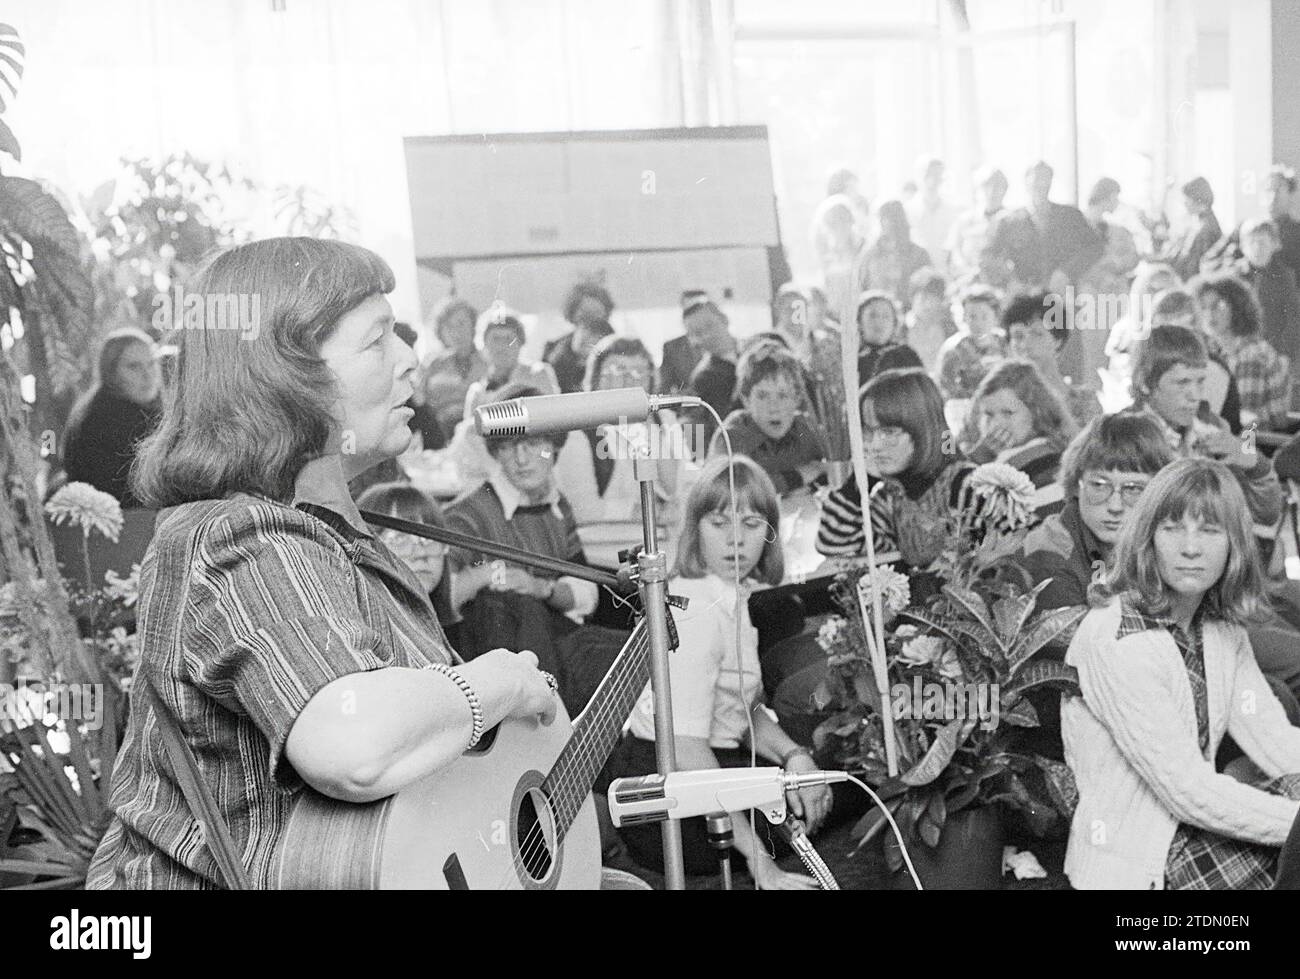 Singer in Red Cross Hospital, B'wijk, Coby Schreier, Red Cross, Red Cross hospital, Persons singing and music, 24-09-1977, Whizgle News from the Past, Tailored for the Future. Explore historical narratives, Dutch The Netherlands agency image with a modern perspective, bridging the gap between yesterday's events and tomorrow's insights. A timeless journey shaping the stories that shape our future Stock Photo